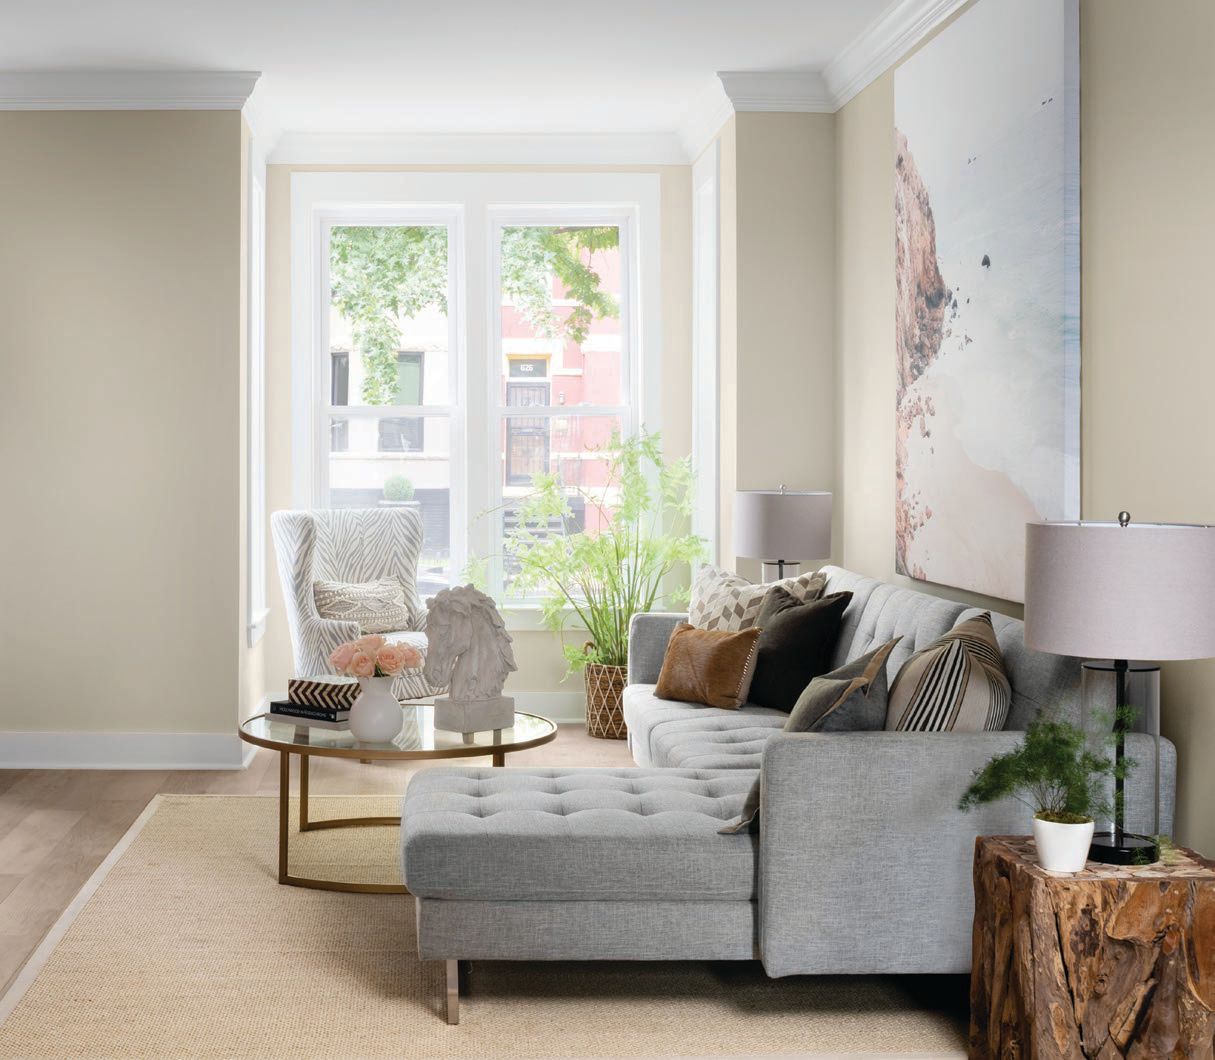 The team from Dogwood Interiors gutted this historic rowhouse and knocked down walls to create a more open floor plan PHOTOGRAPHED BY ROBERT RADIFERA